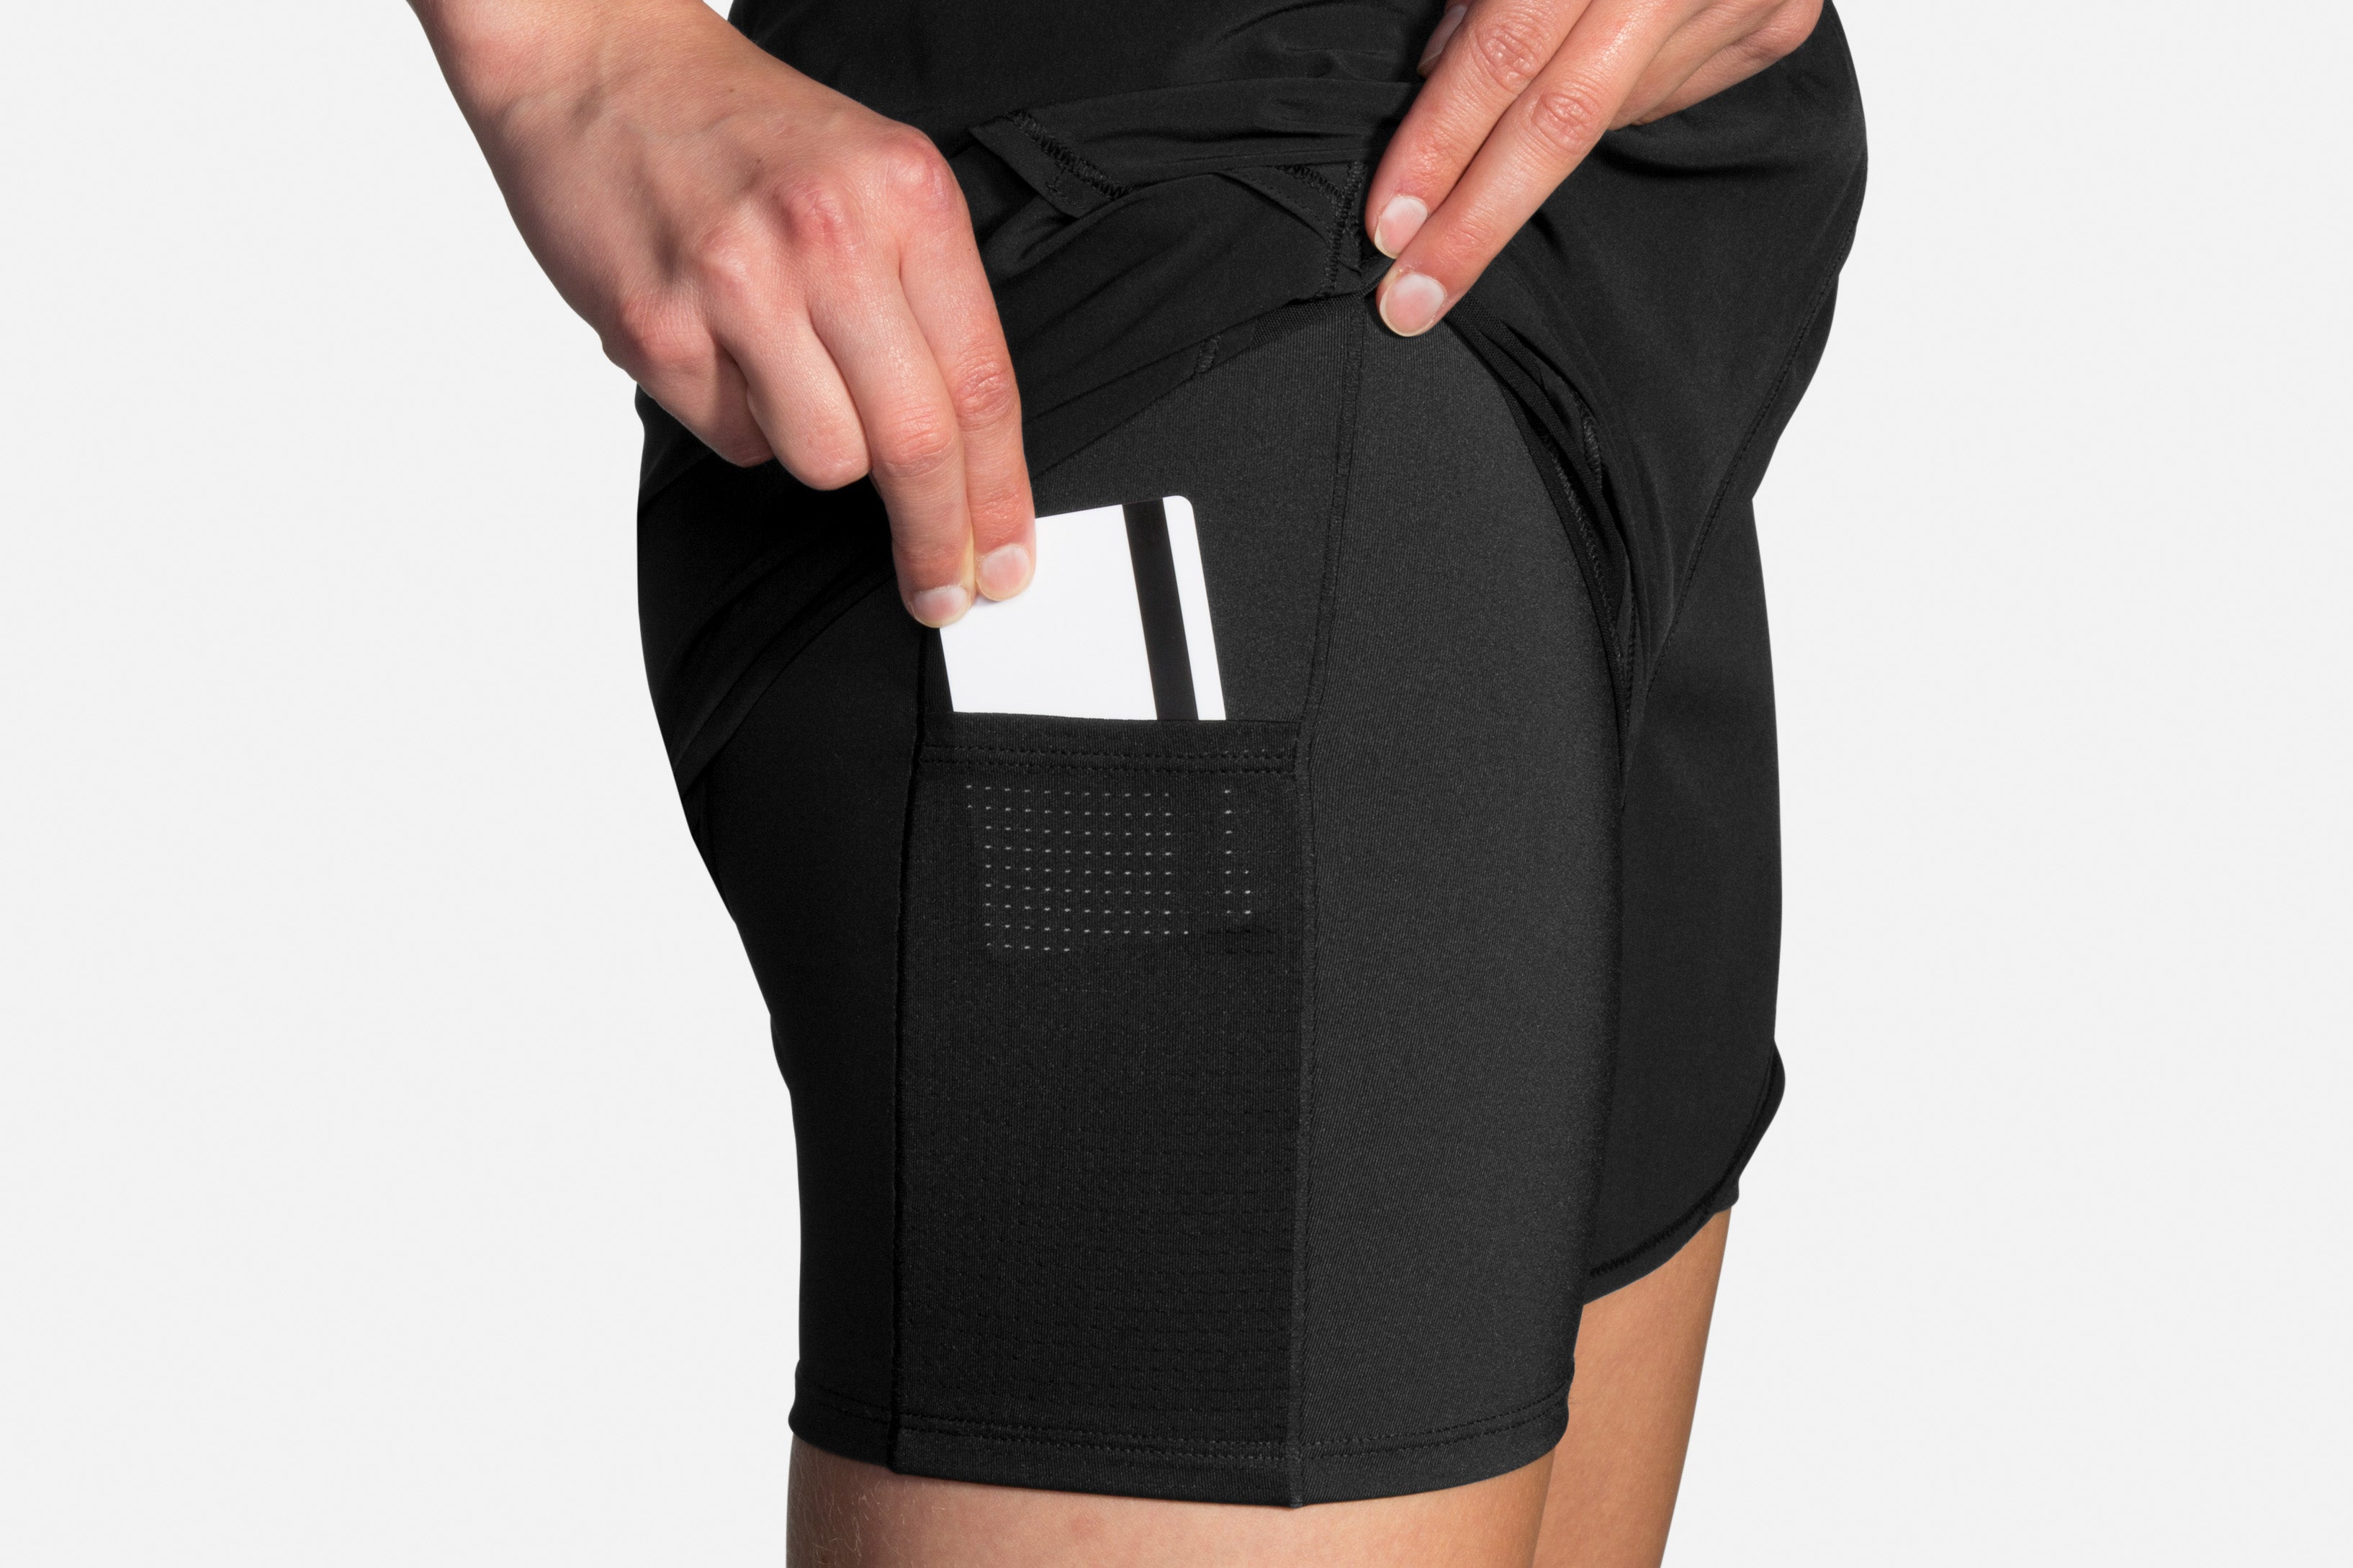 Womens Chaser 5" 2-in-1 Shorts